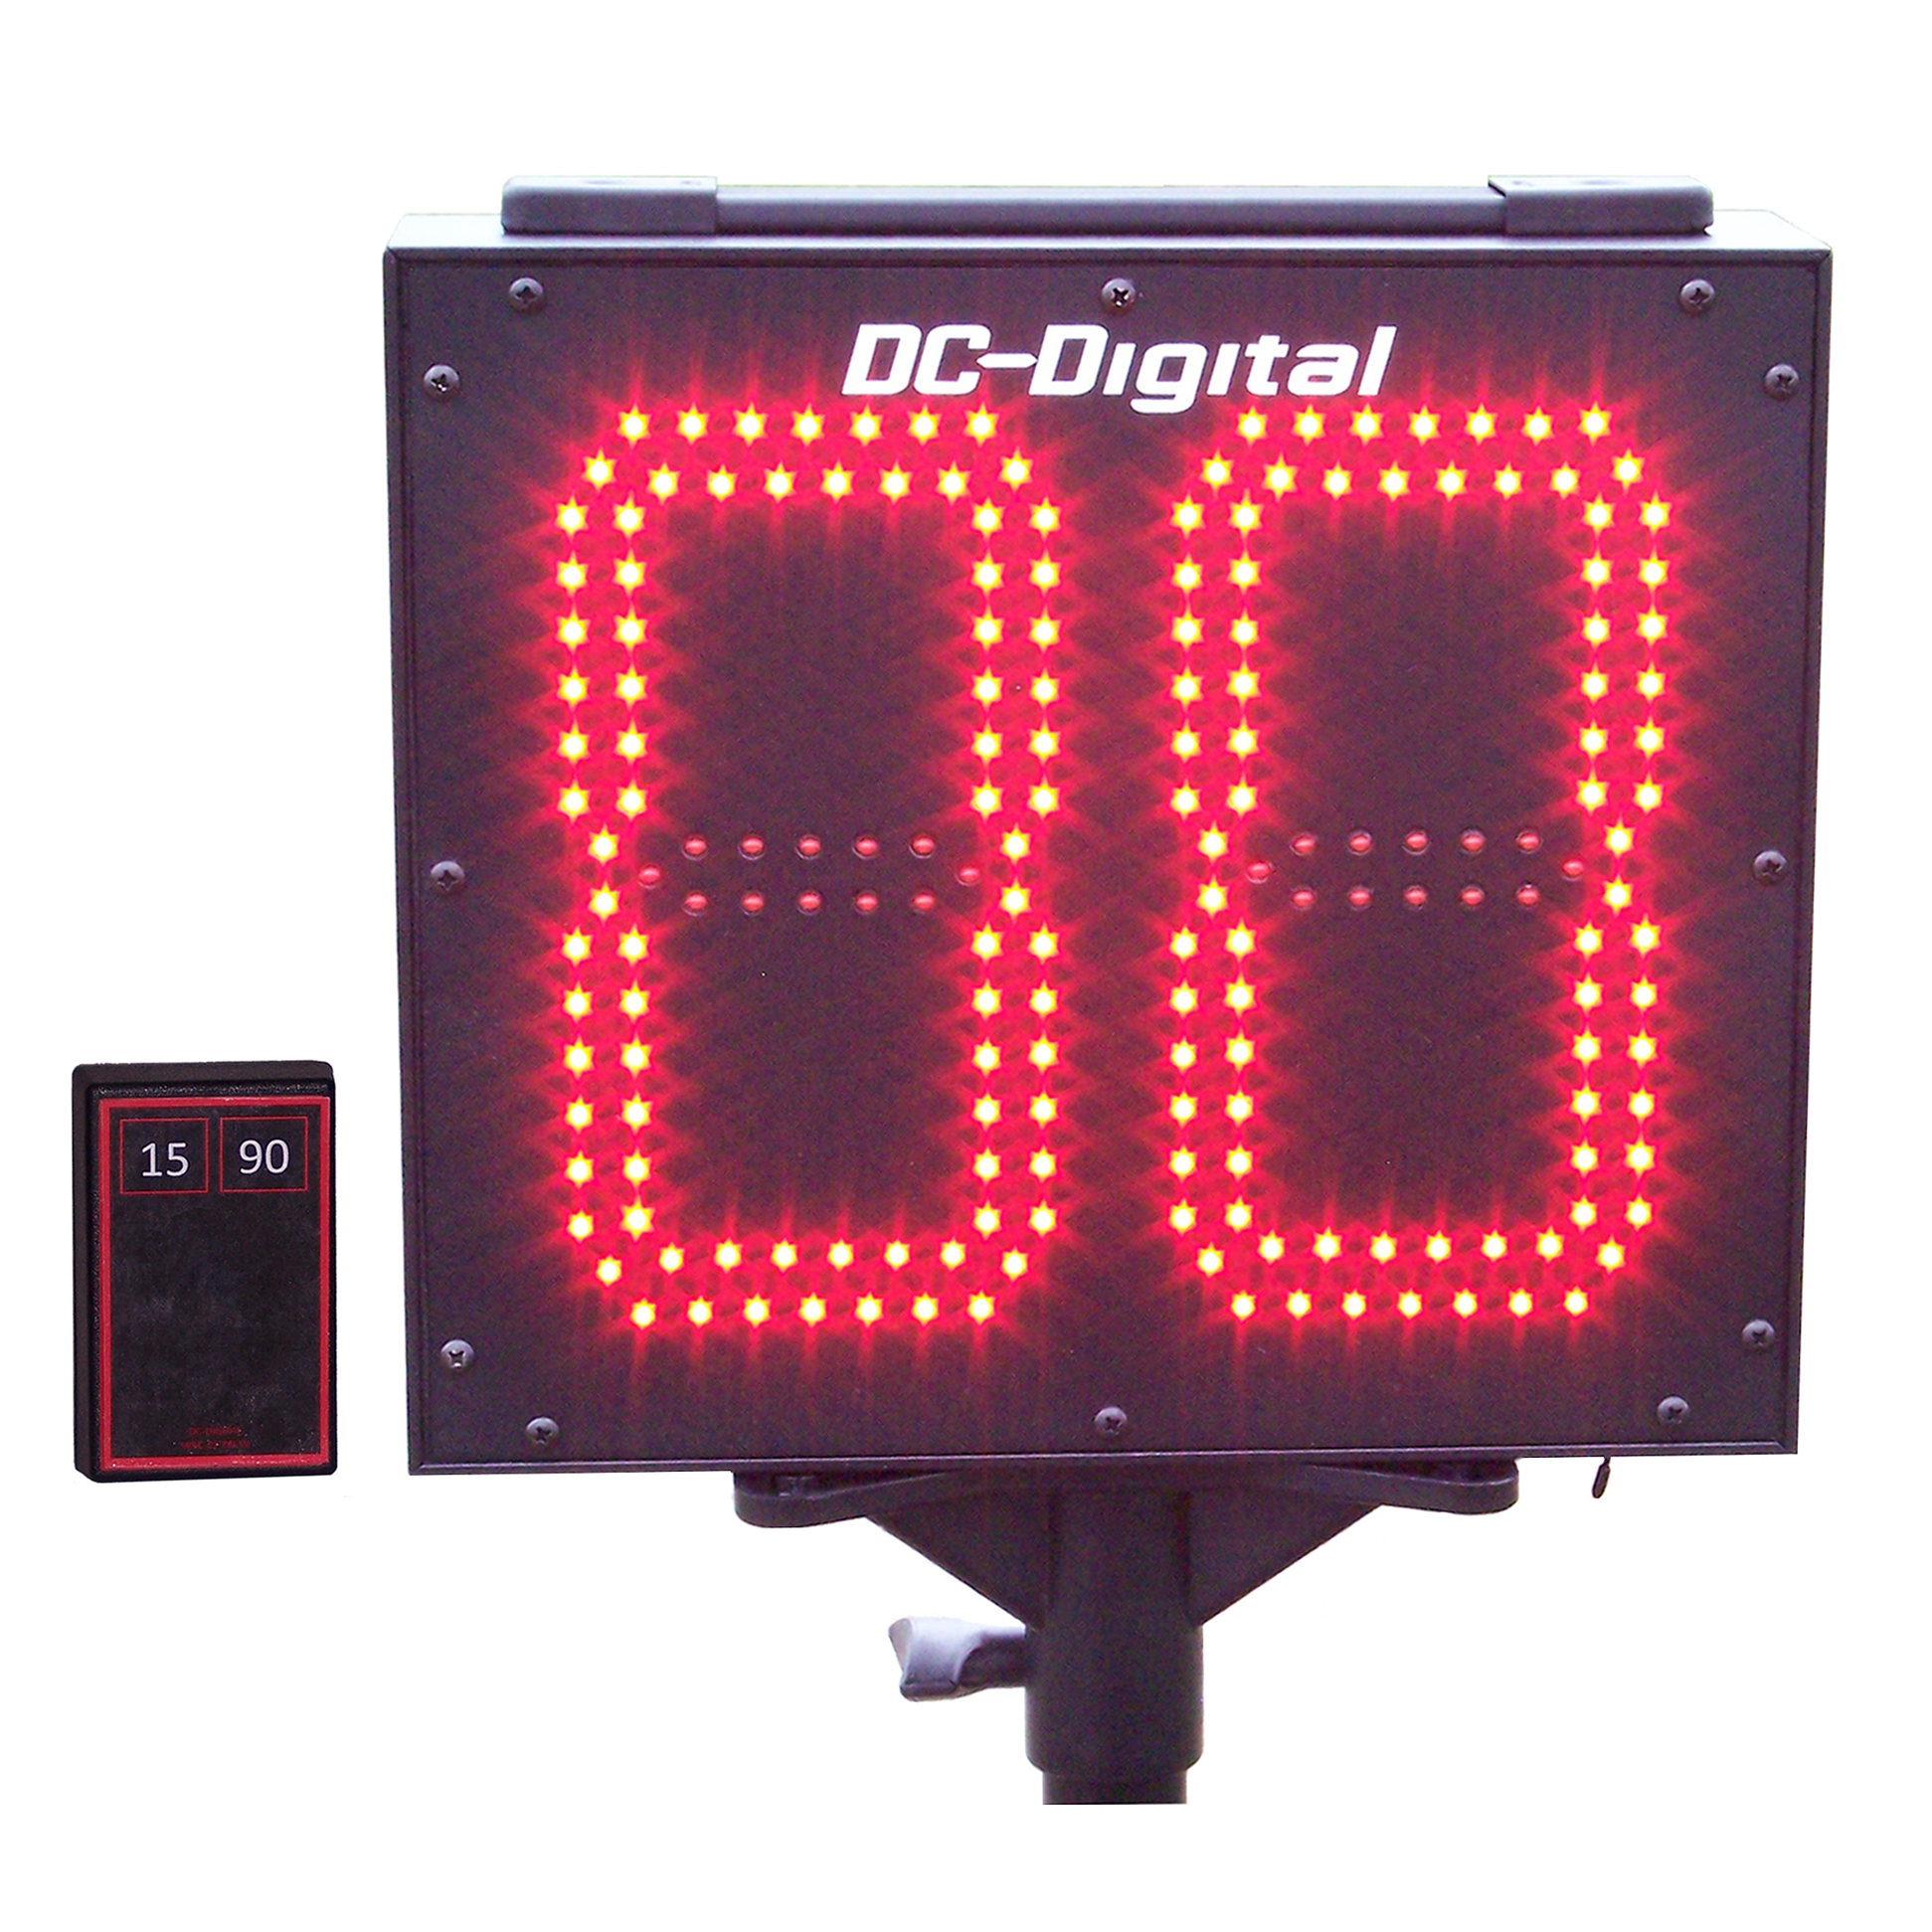 (DC-802C-W-Pitch) Portable Baseball-Softball, 8 Inch LED Electronic Digital Pitch Counter, RF-Wireless Remote Controlled (OUTDOOR)